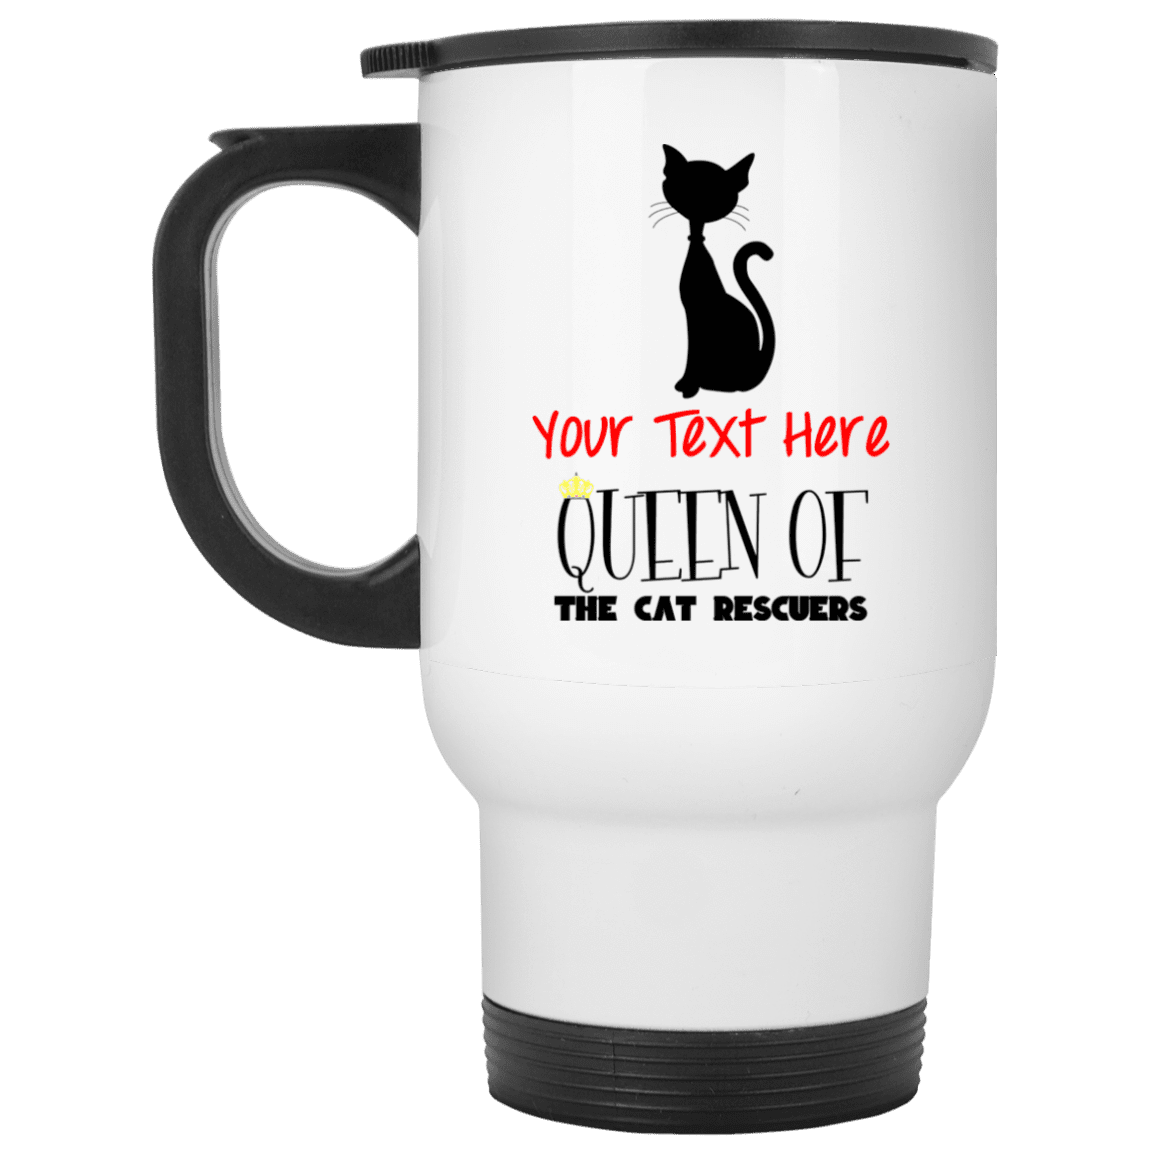 Personalized Queen Of The Cat Rescuers - Mugs.